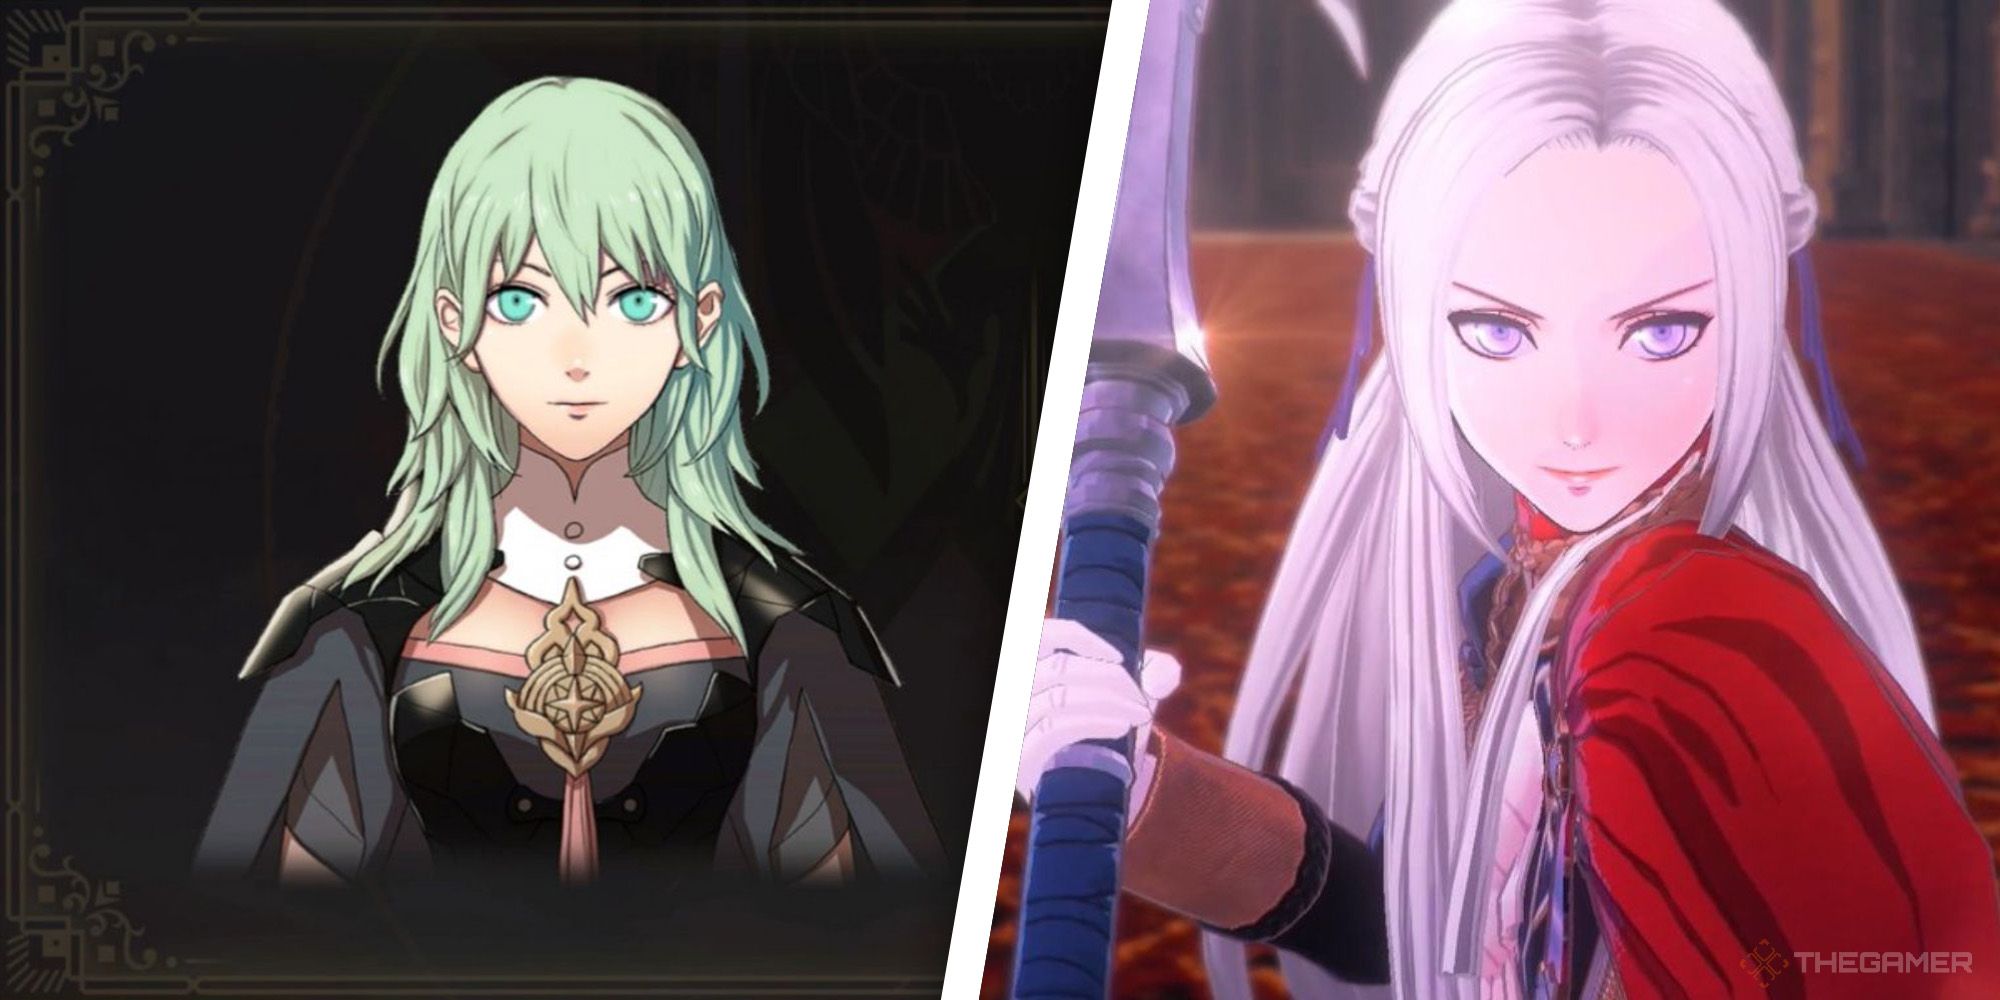 characters-that-need-to-be-playable-in-fire-emblem-warriors-three-hopes